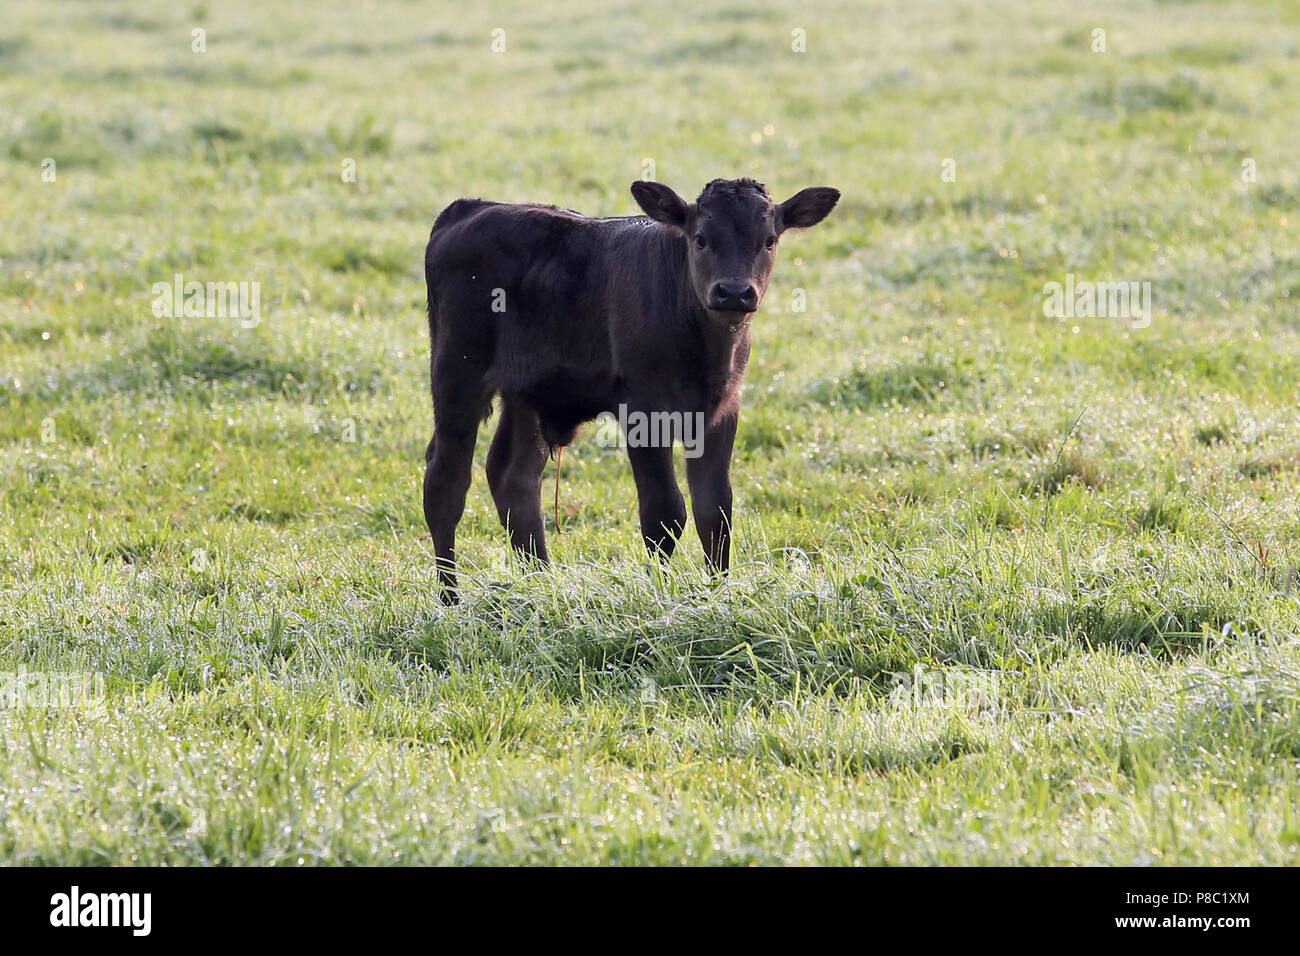 Gestüt Itlingen, newborn calf stands attentively on a meadow Stock Photo